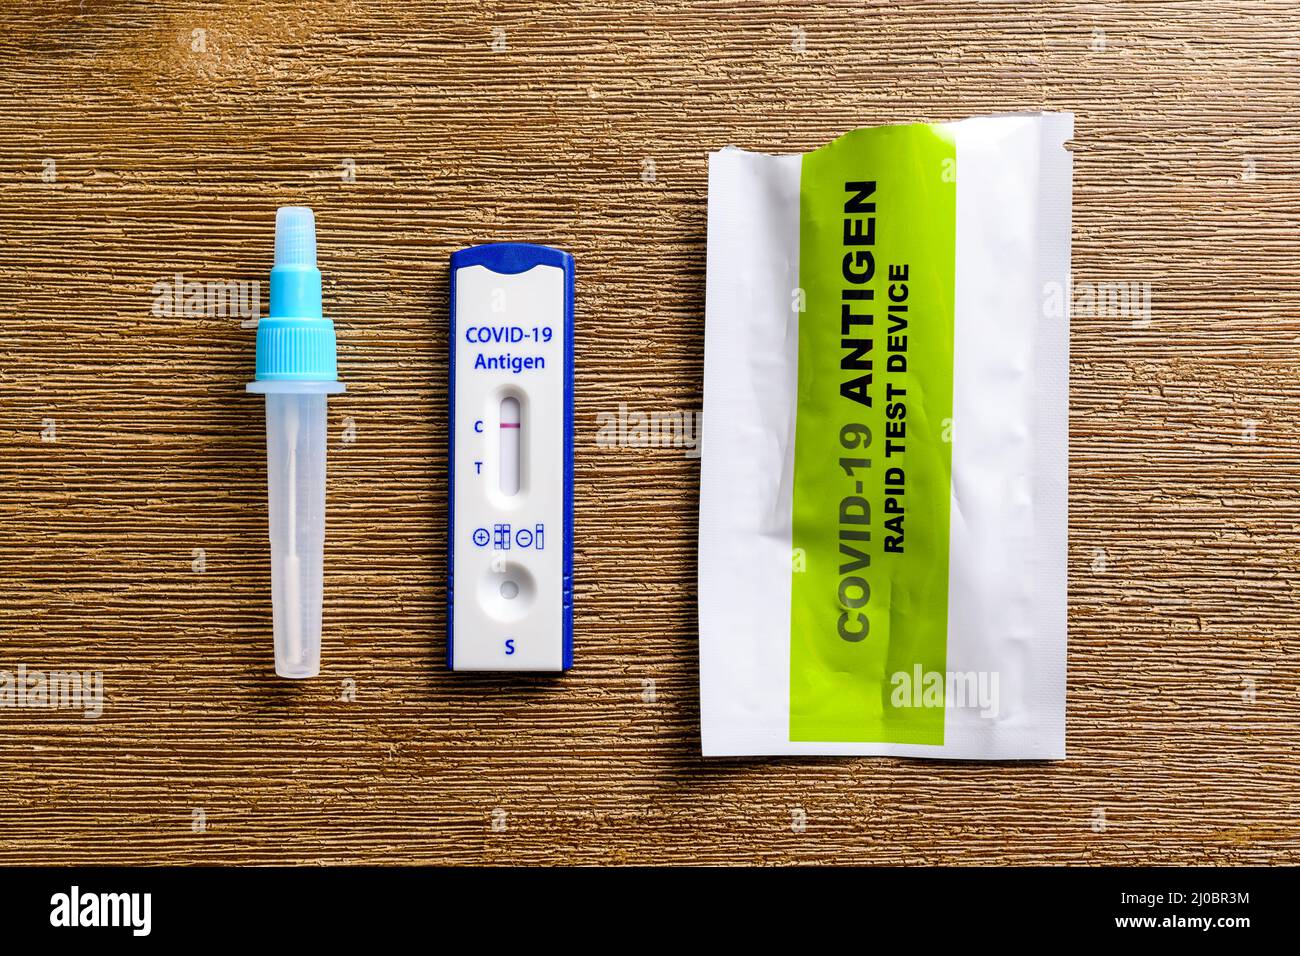 COVID-19 rapid antigen test provided by the Australian government and showing negative result Stock Photo